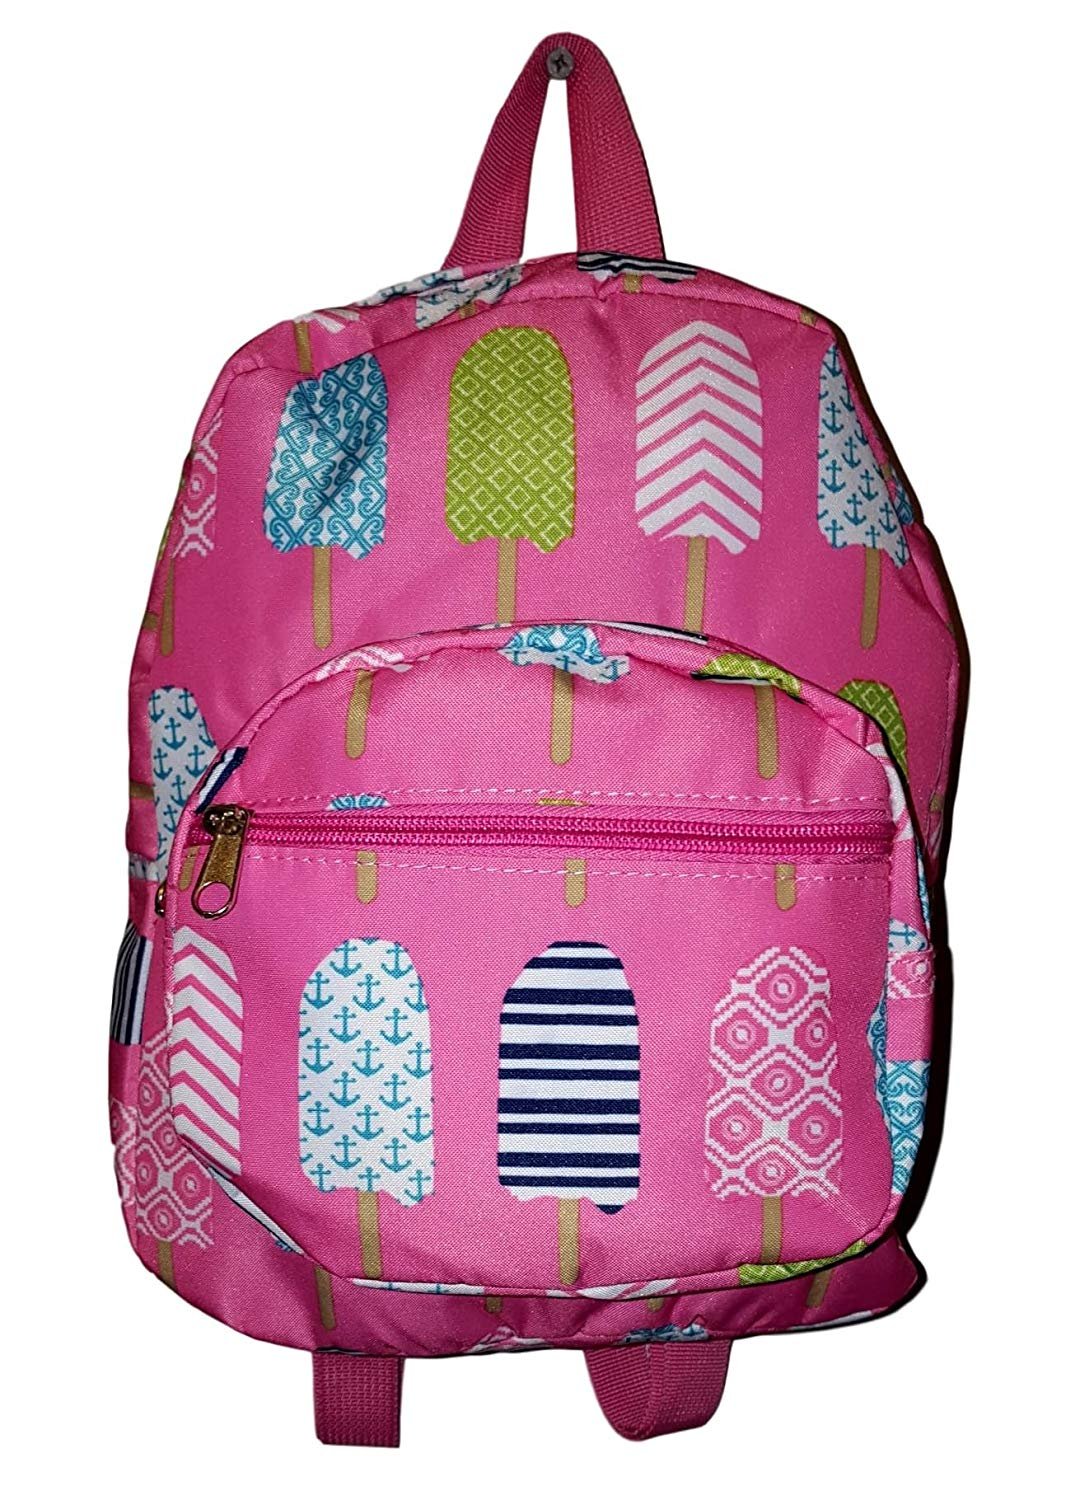 11-inch Mini Backpack Purse, Zipper Front Pockets Teen Child Pink Ice Cream Print - image 2 of 3